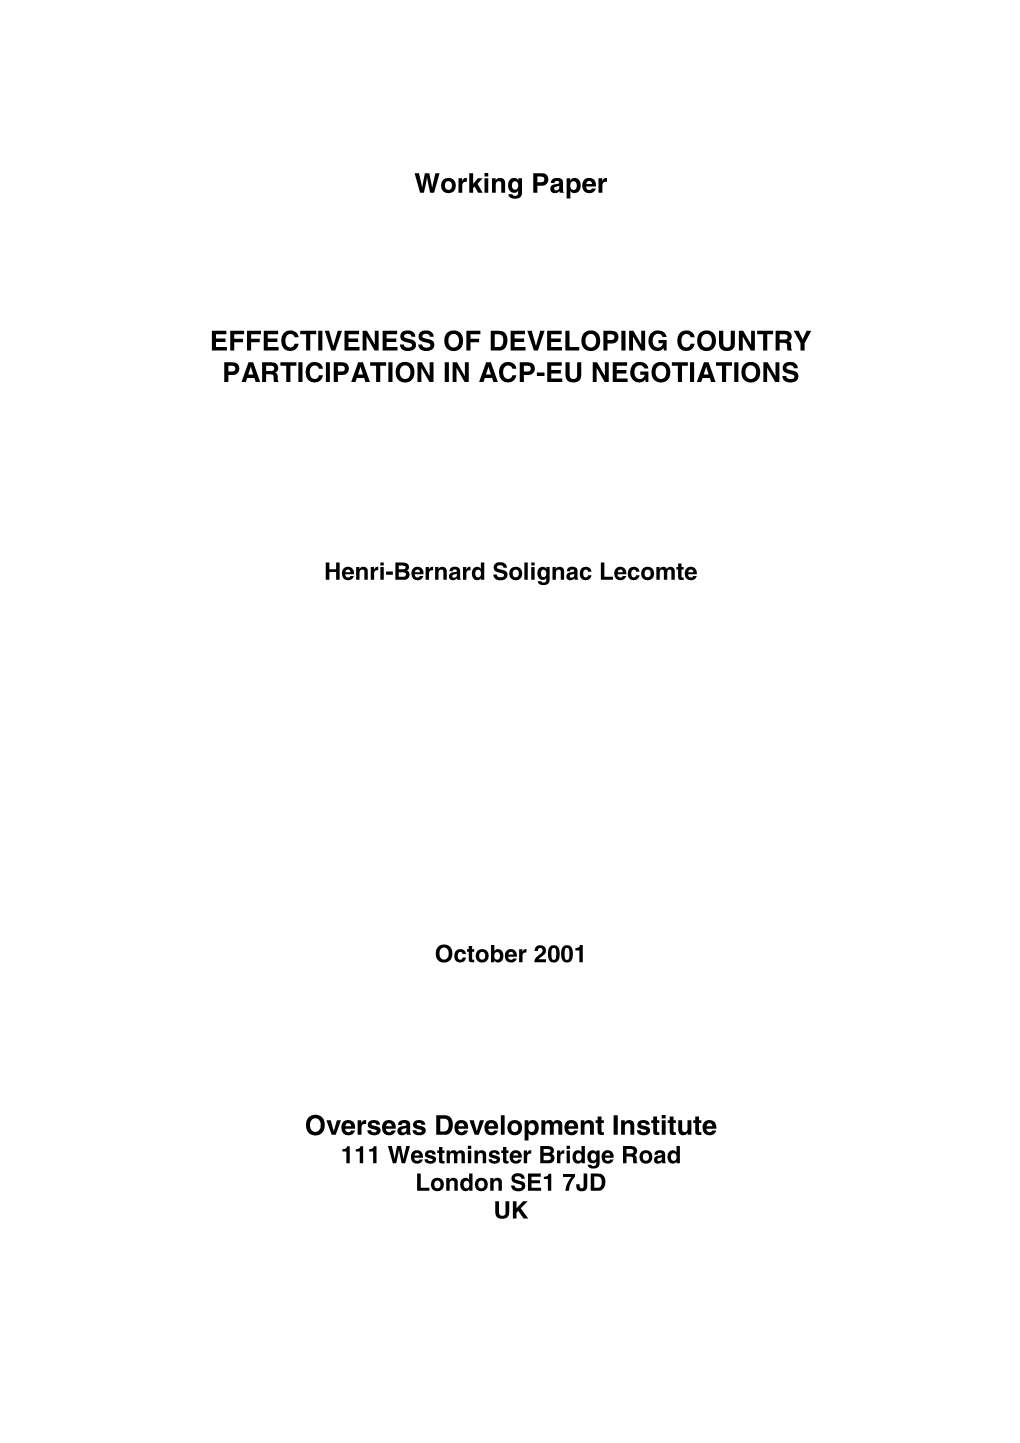 Effectiveness of Developing Country Participation in Acp-Eu Negotiations